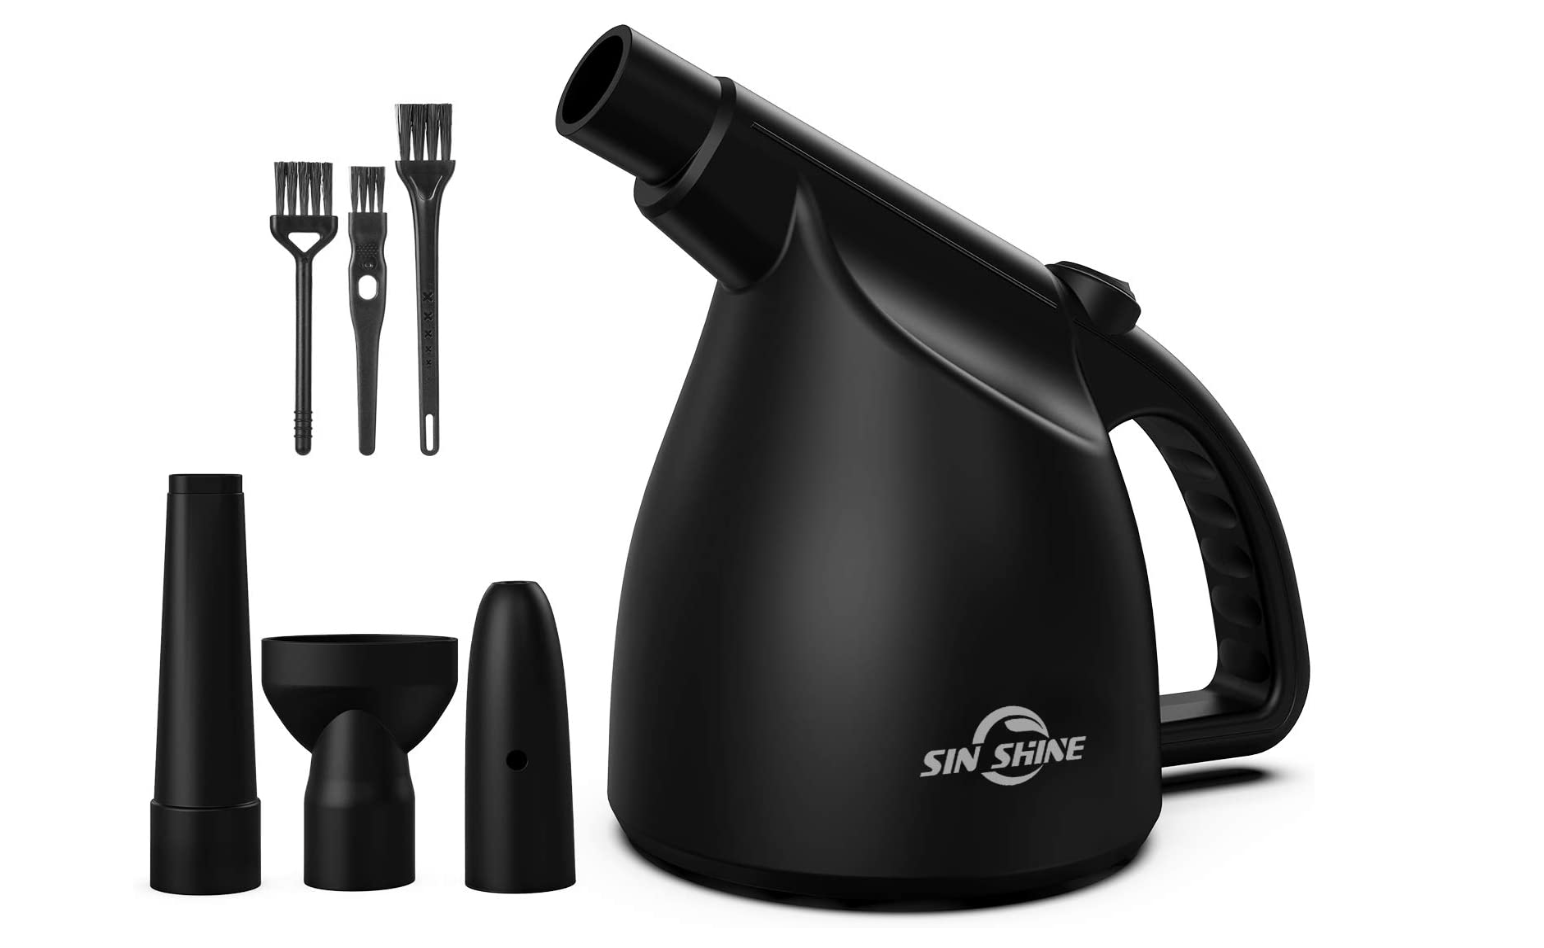 SIN SHINE Air Duster product image of a black air duster next to a set of smaller utensils.